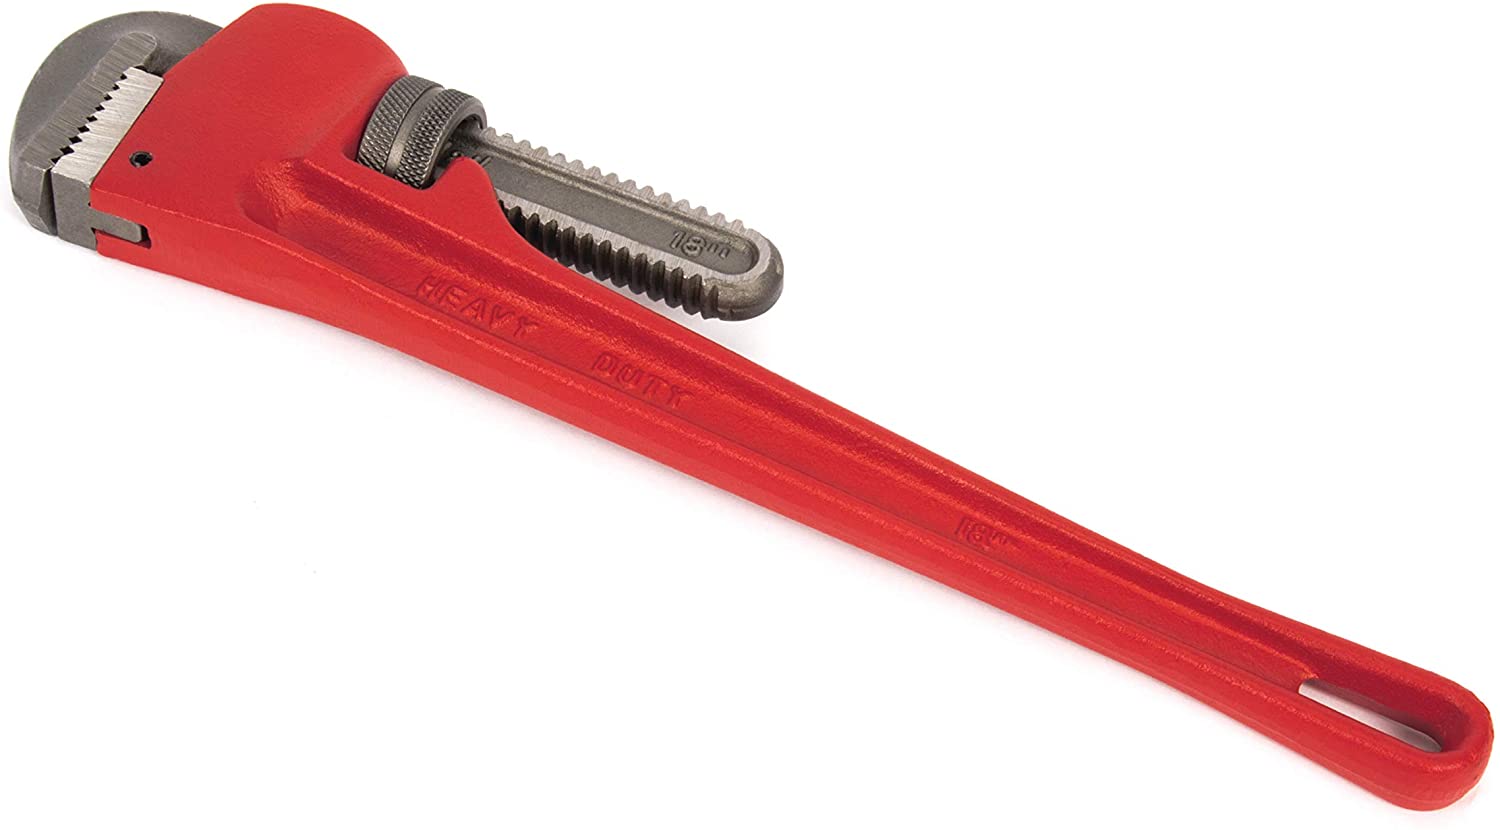 Titan 21318 18-Inch Steel Pipe Wrench - MPR Tools & Equipment